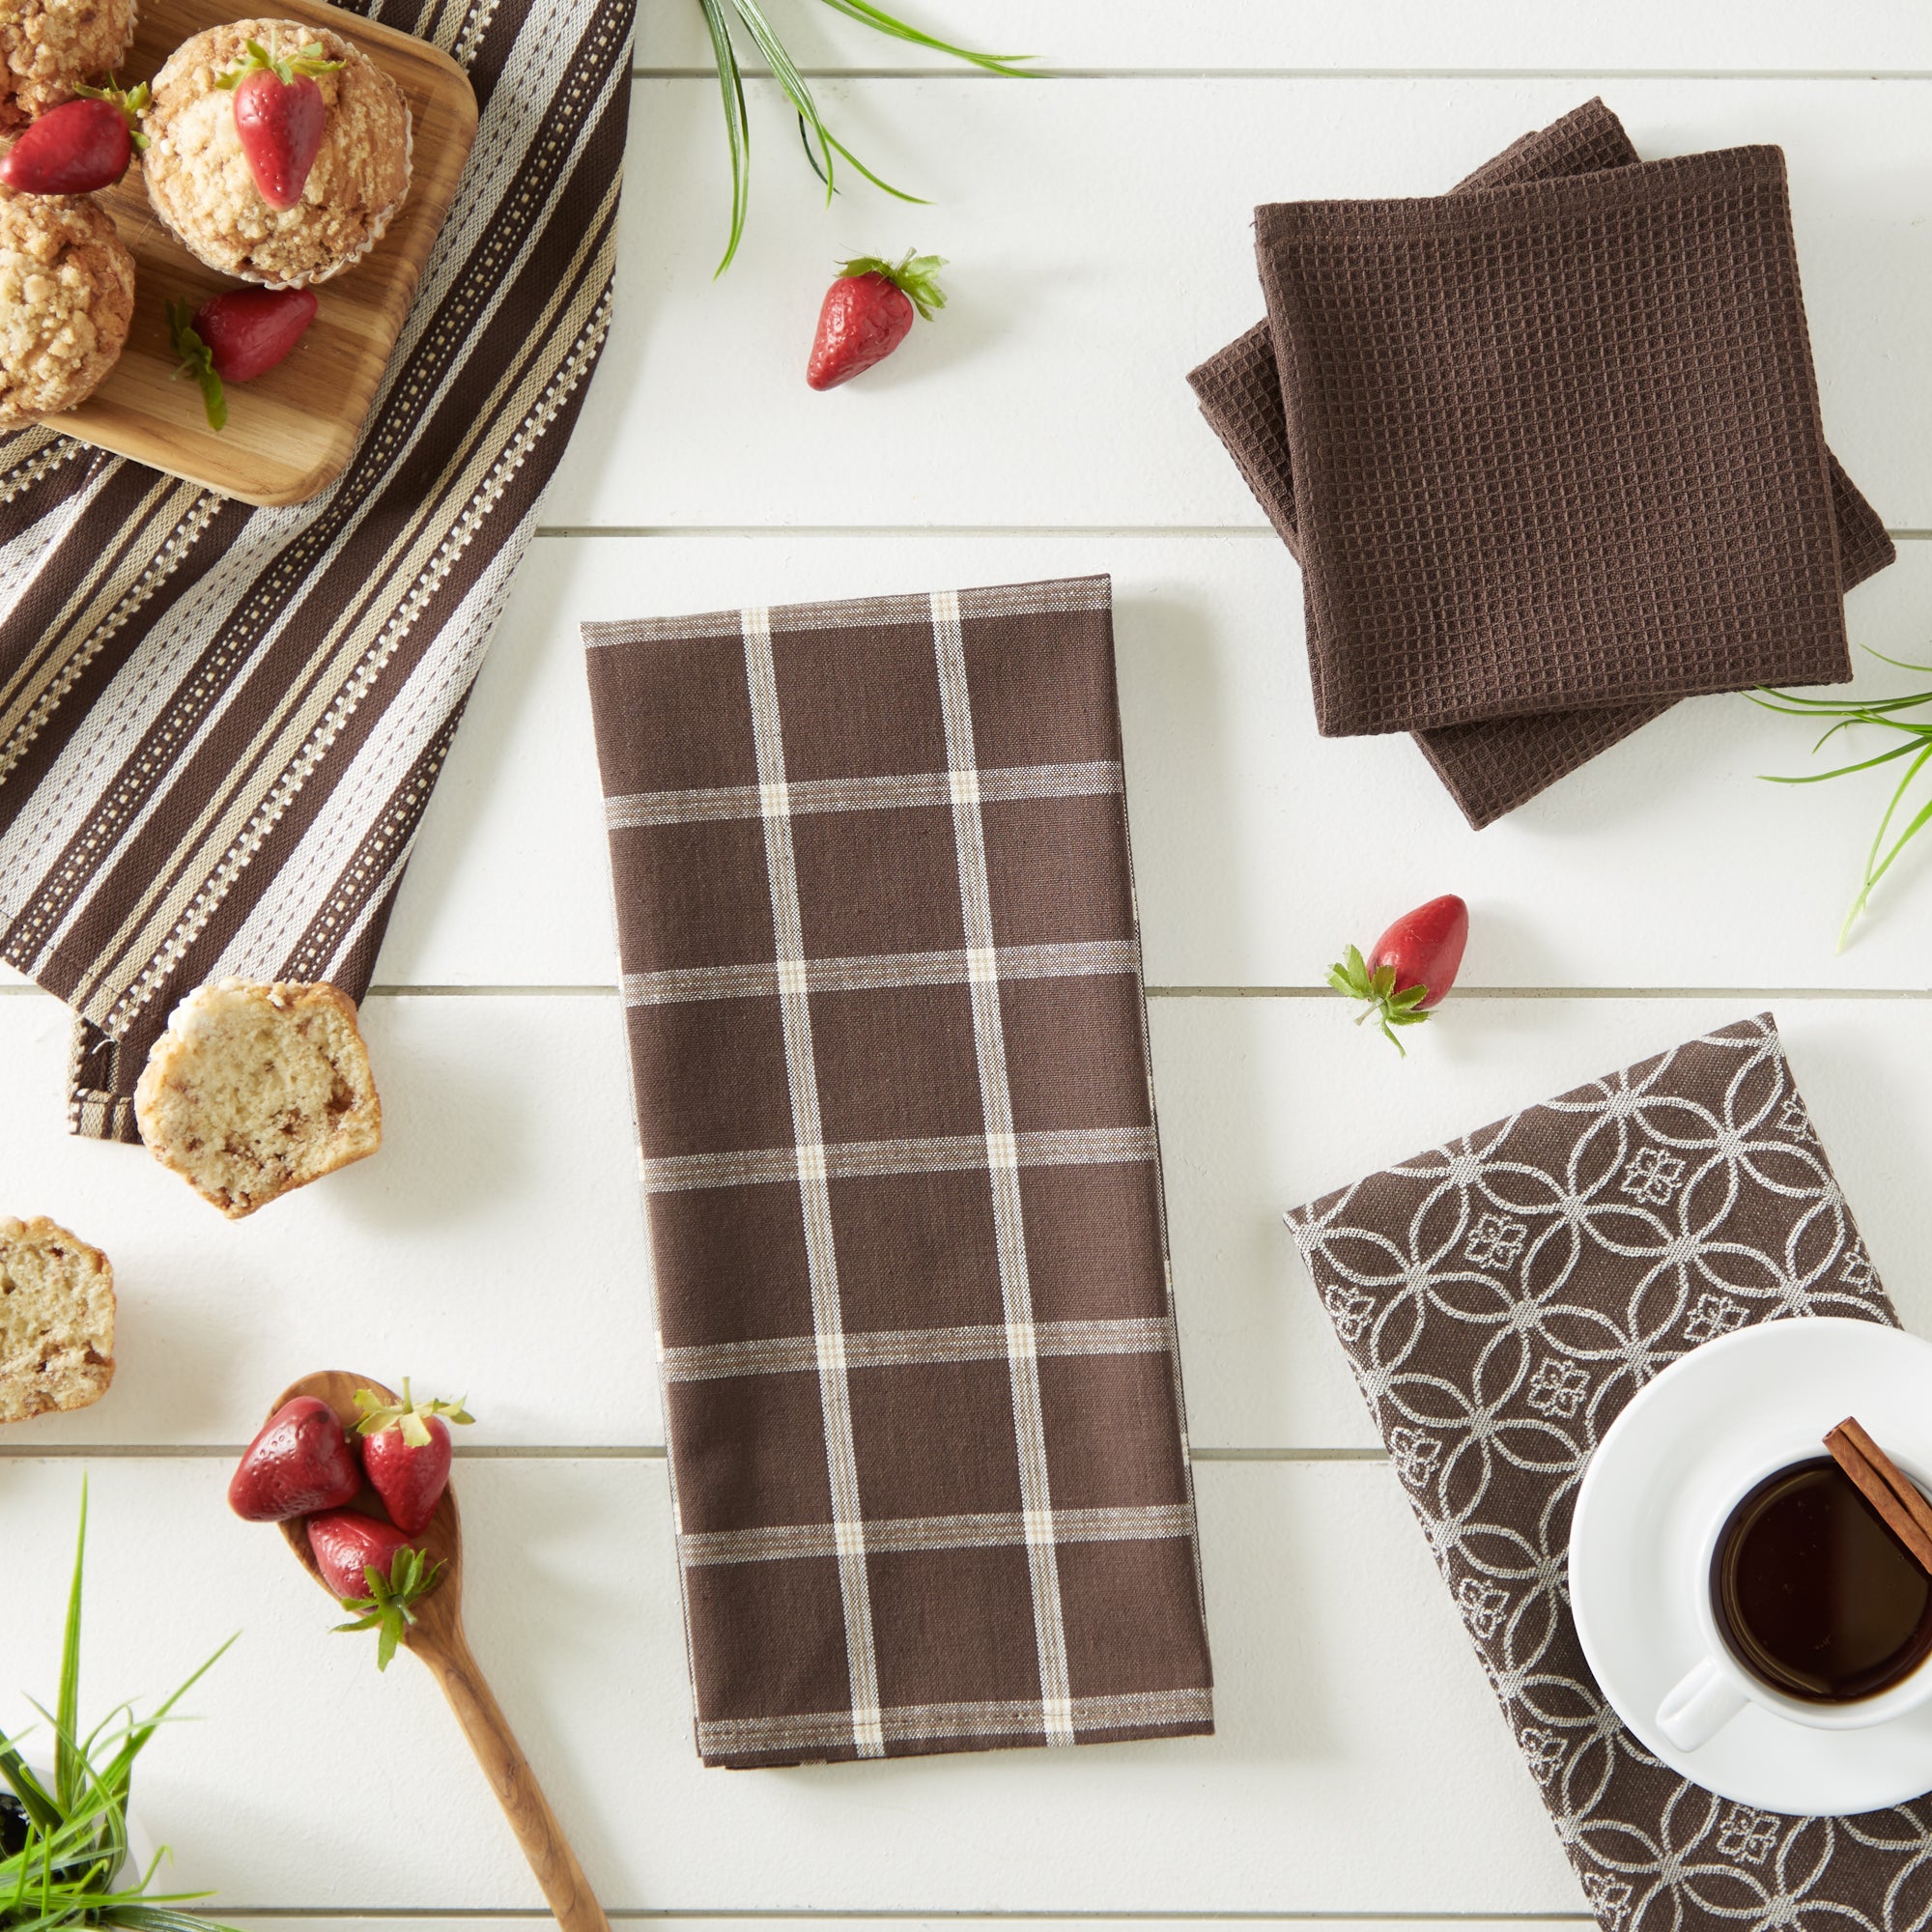 DII Assorted Brown Woven Dishtowel (Set of 5)